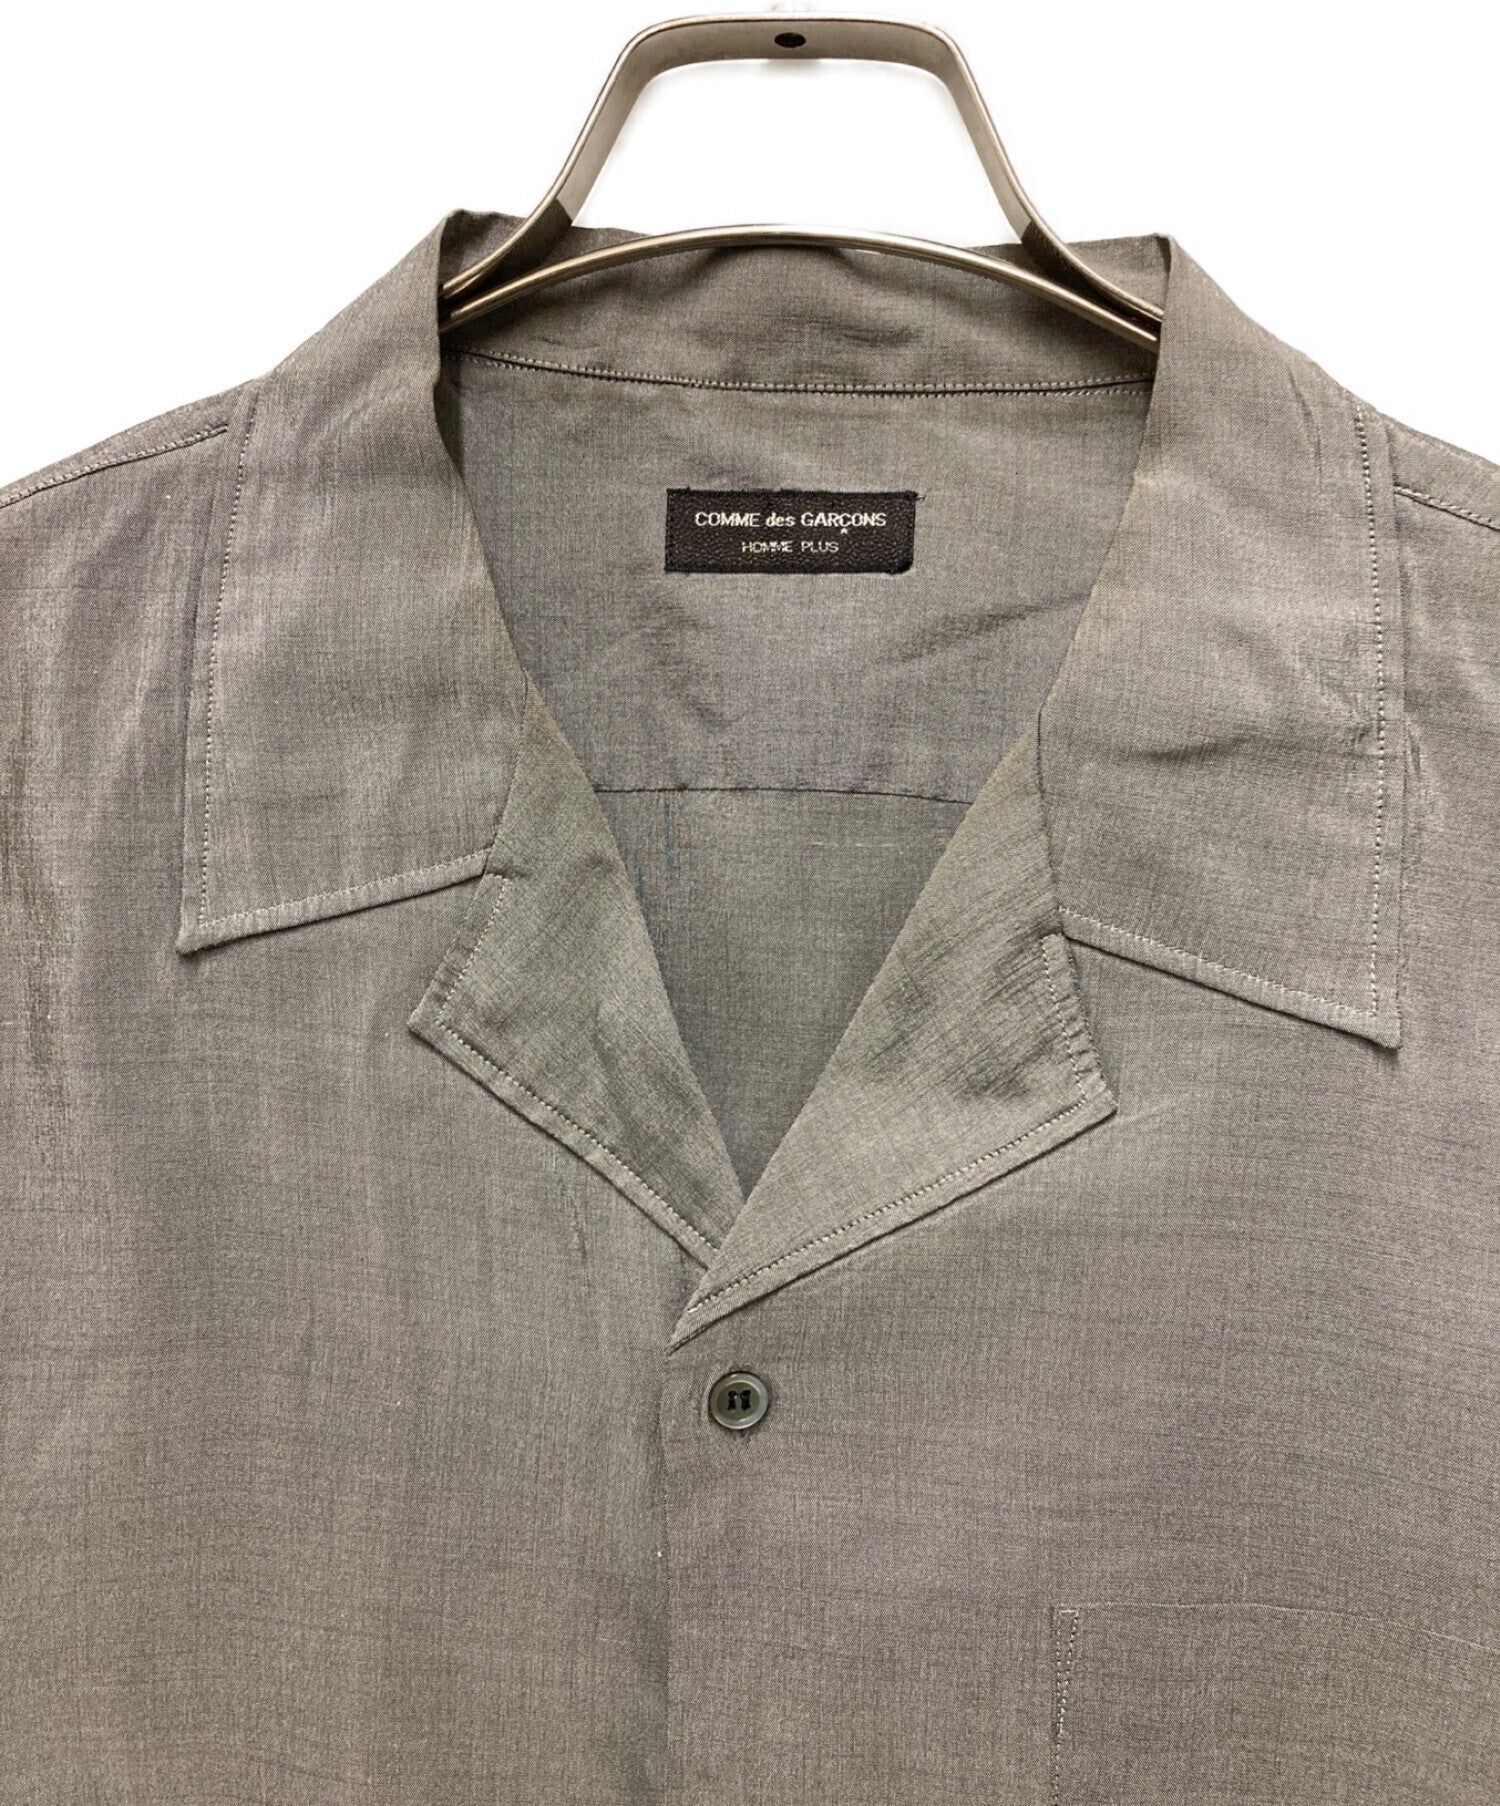 [Pre-owned] COMME des GARCONS HOMME PLUS Silk poly open collar shirt AD1997  Archive collar sewn design PB-100130